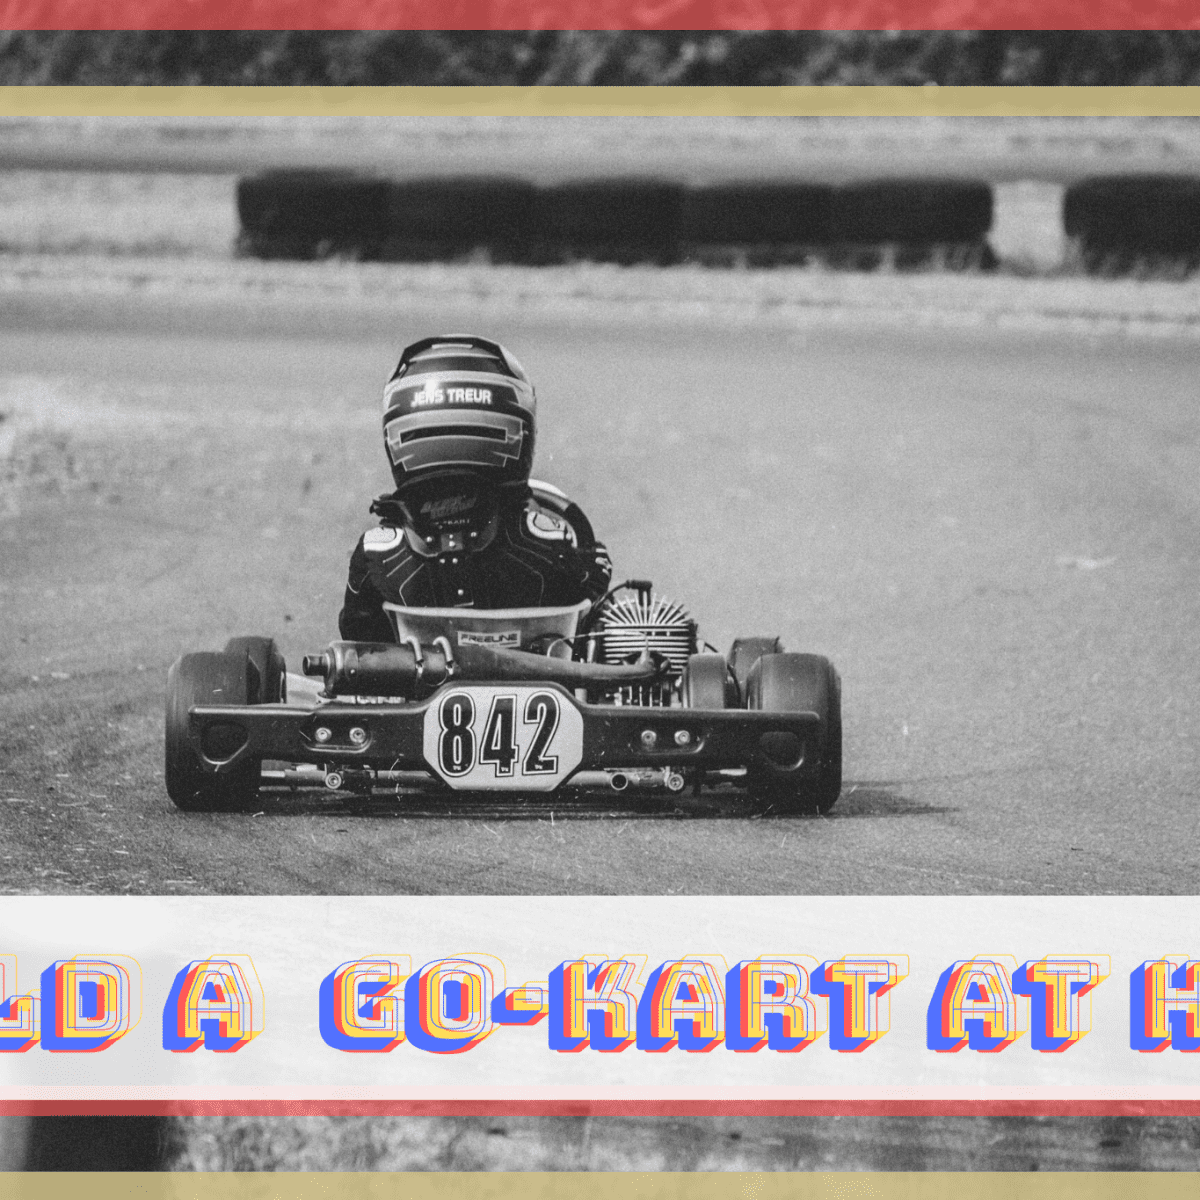 How To Get Started Racing Go-Karts